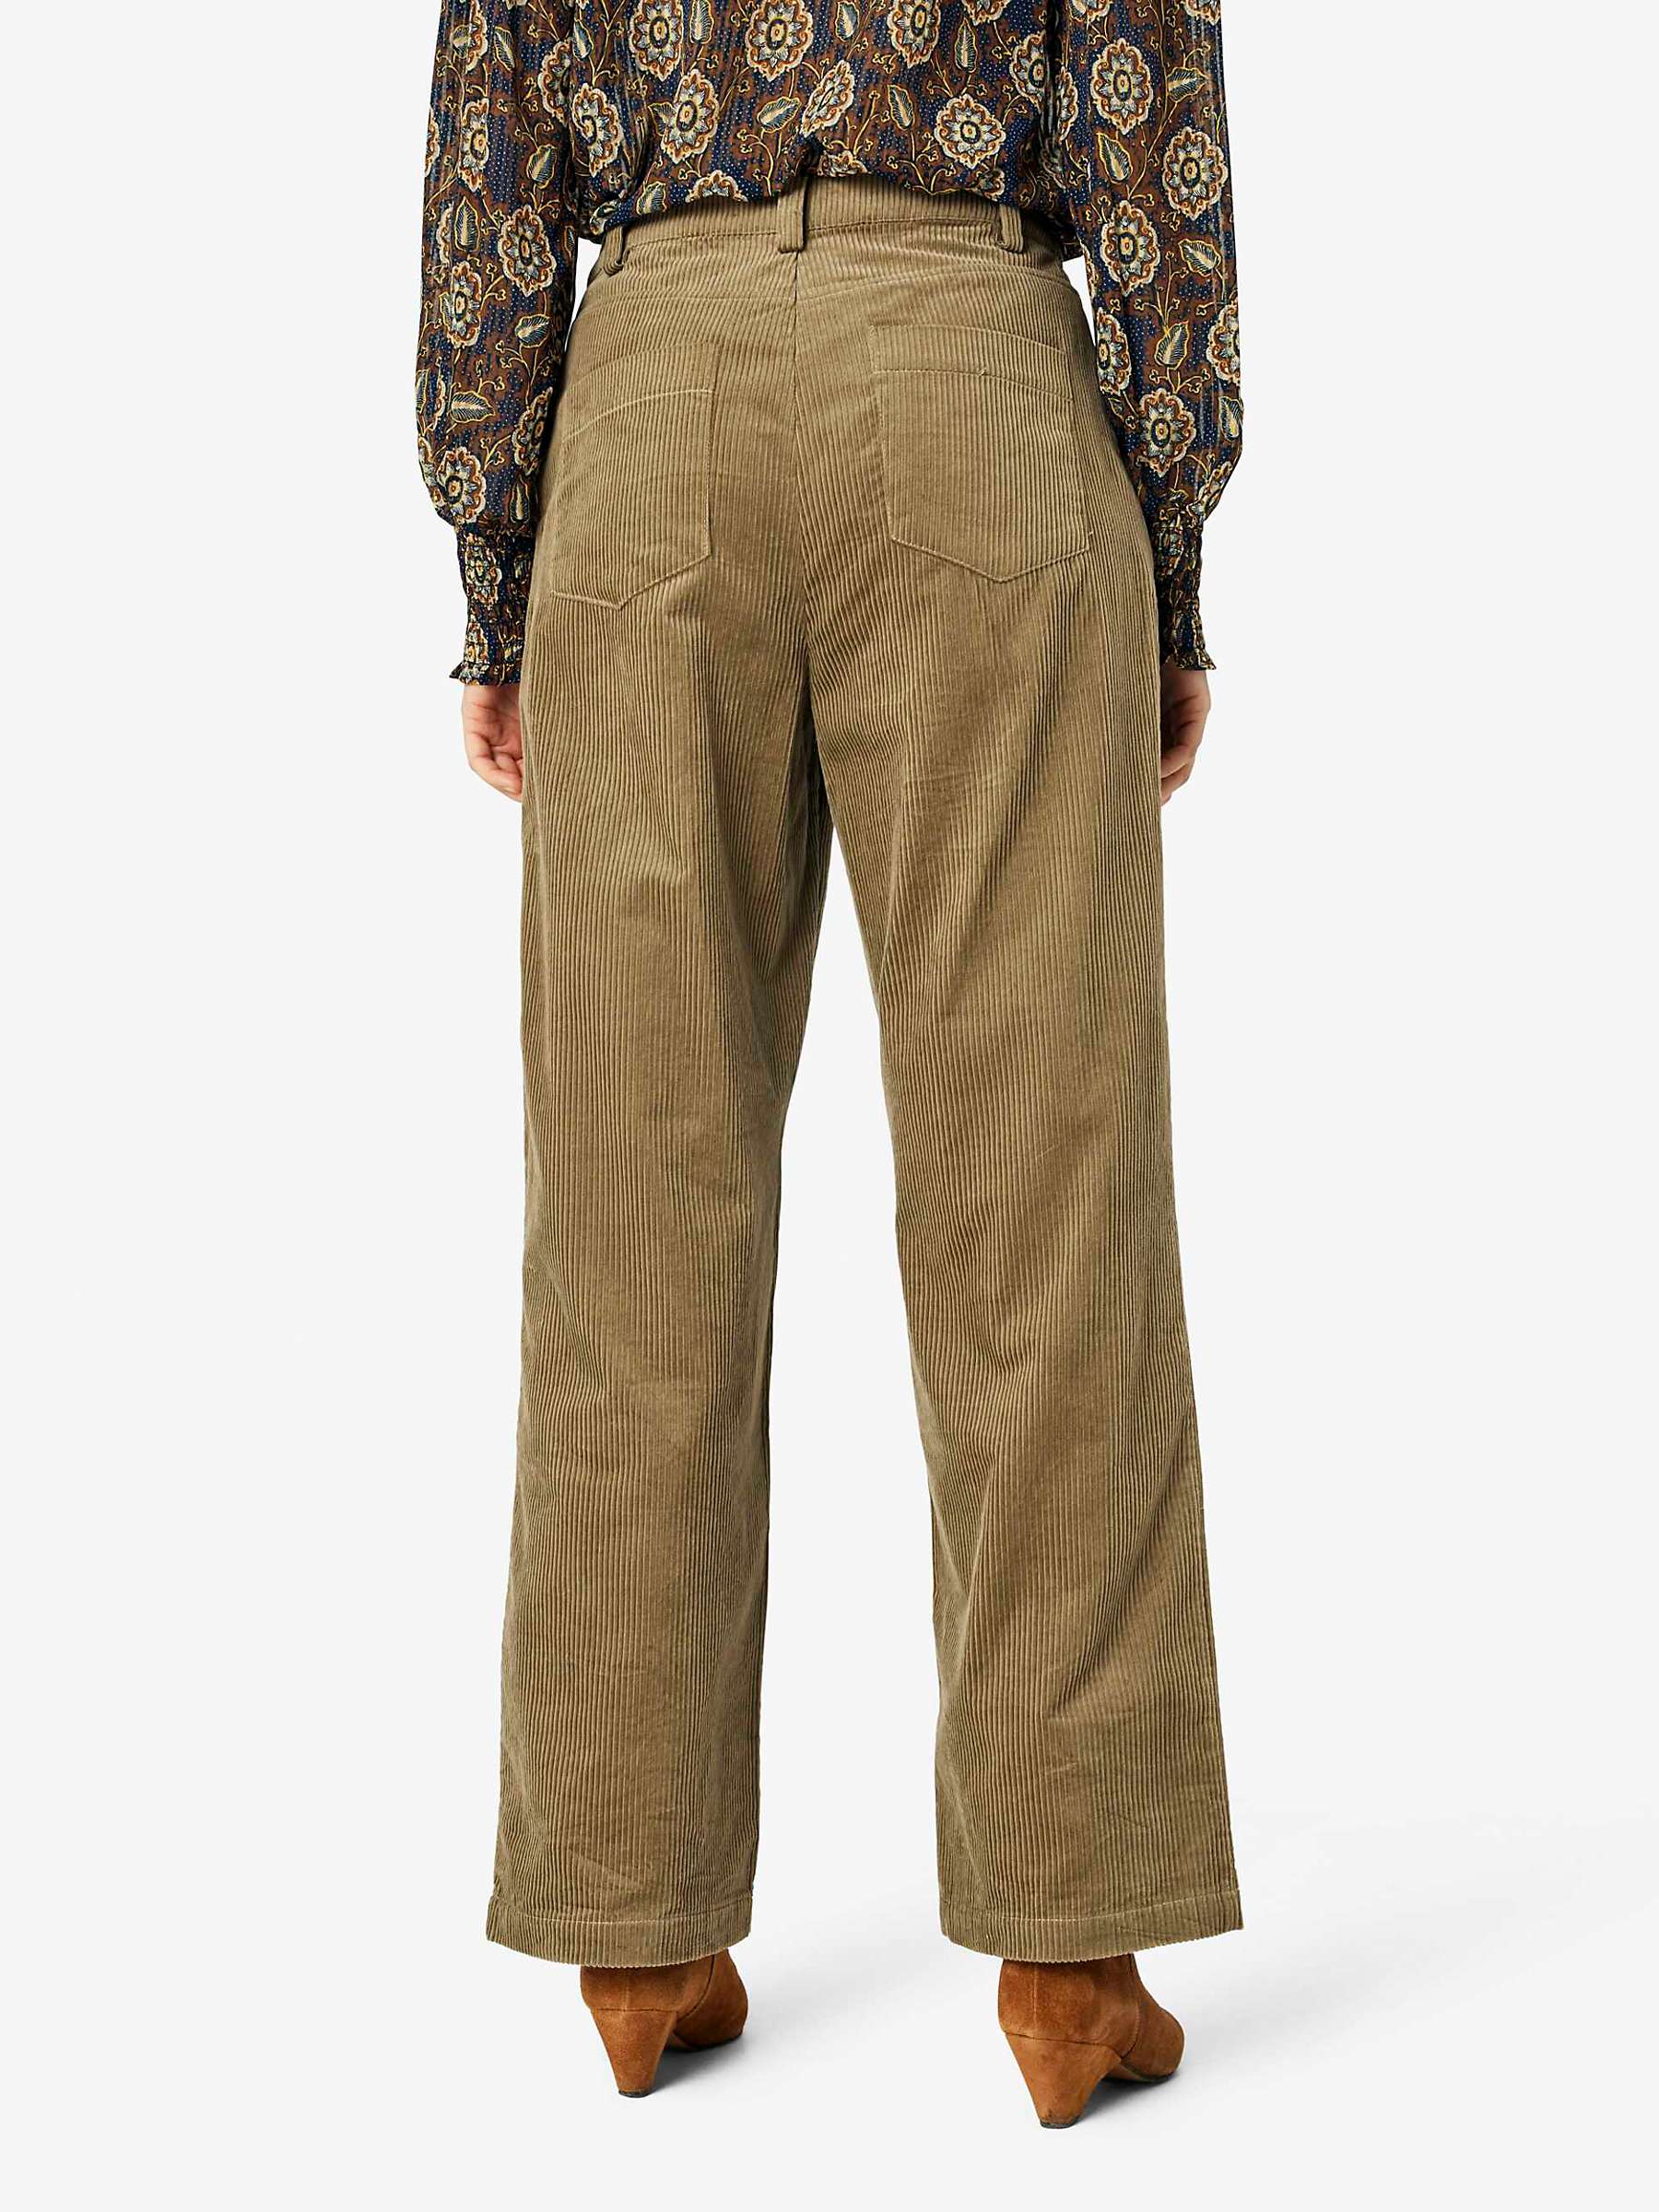 Buy Noa Noa Trine Relaxed Cord Trousers, Capers Green Online at johnlewis.com